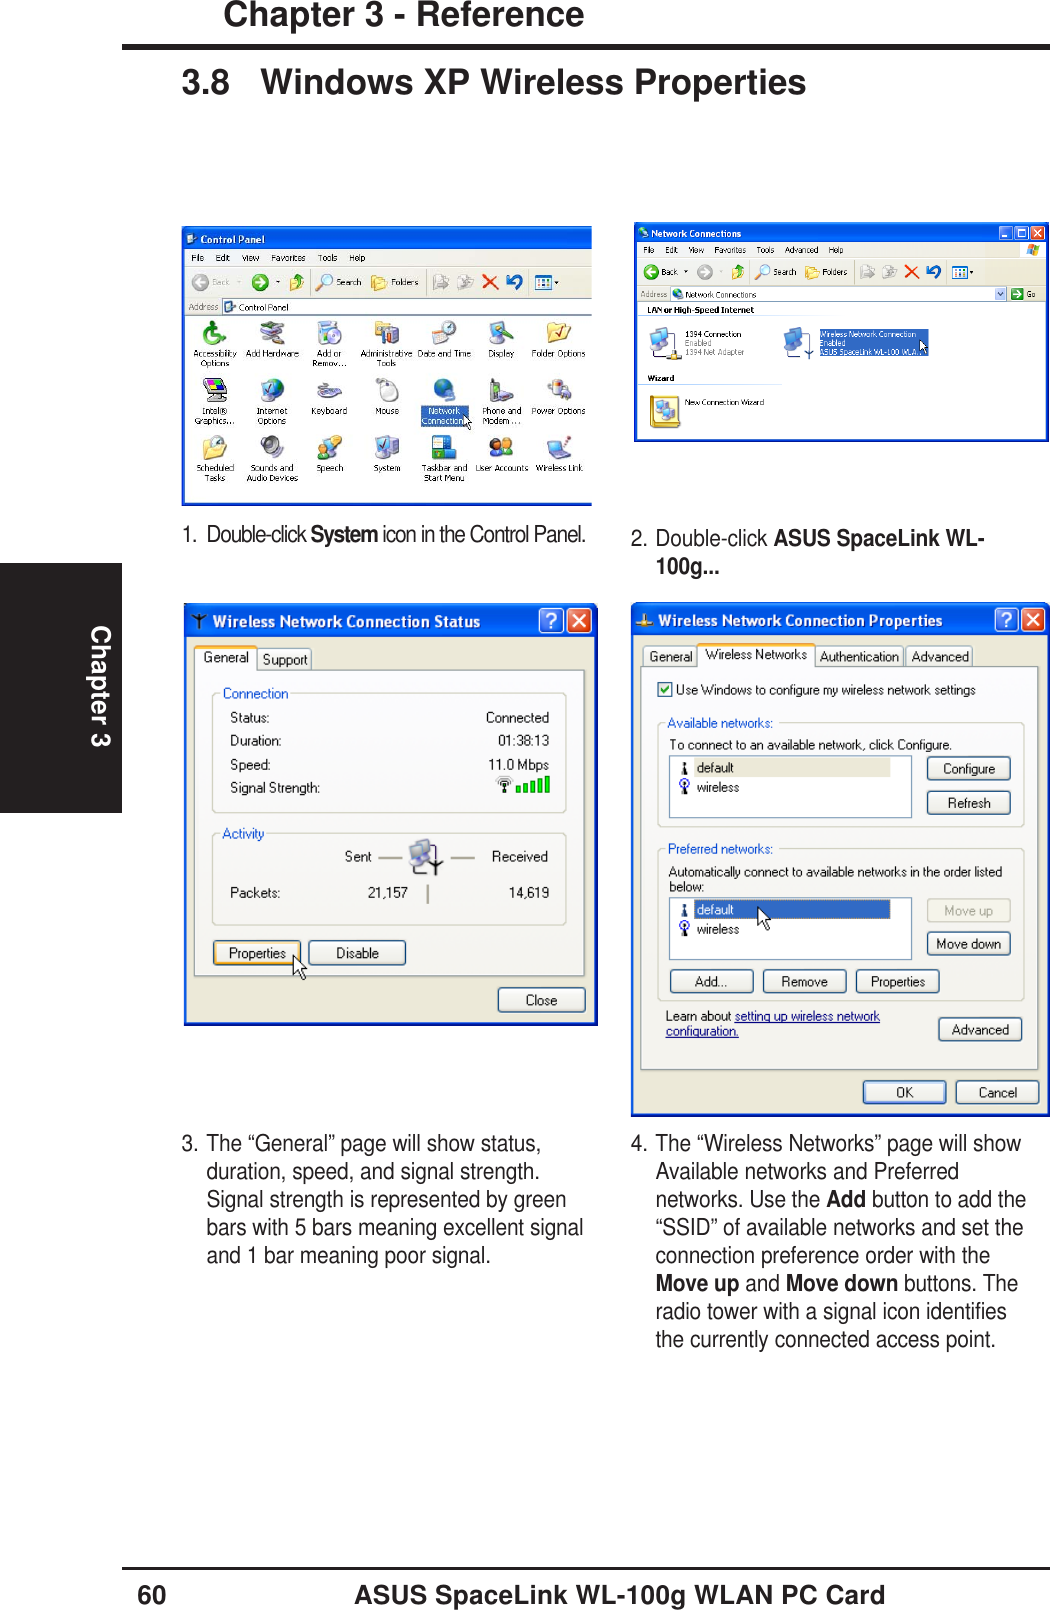 60 ASUS SpaceLink WL-100g WLAN PC CardChapter 3 - ReferenceChapter 33.8 Windows XP Wireless Properties2. Double-click ASUS SpaceLink WL-100g...1. Double-click System icon in the Control Panel.3. The “General” page will show status,duration, speed, and signal strength.Signal strength is represented by greenbars with 5 bars meaning excellent signaland 1 bar meaning poor signal.4. The “Wireless Networks” page will showAvailable networks and Preferrednetworks. Use the Add button to add the“SSID” of available networks and set theconnection preference order with theMove up and Move down buttons. Theradio tower with a signal icon identifiesthe currently connected access point.